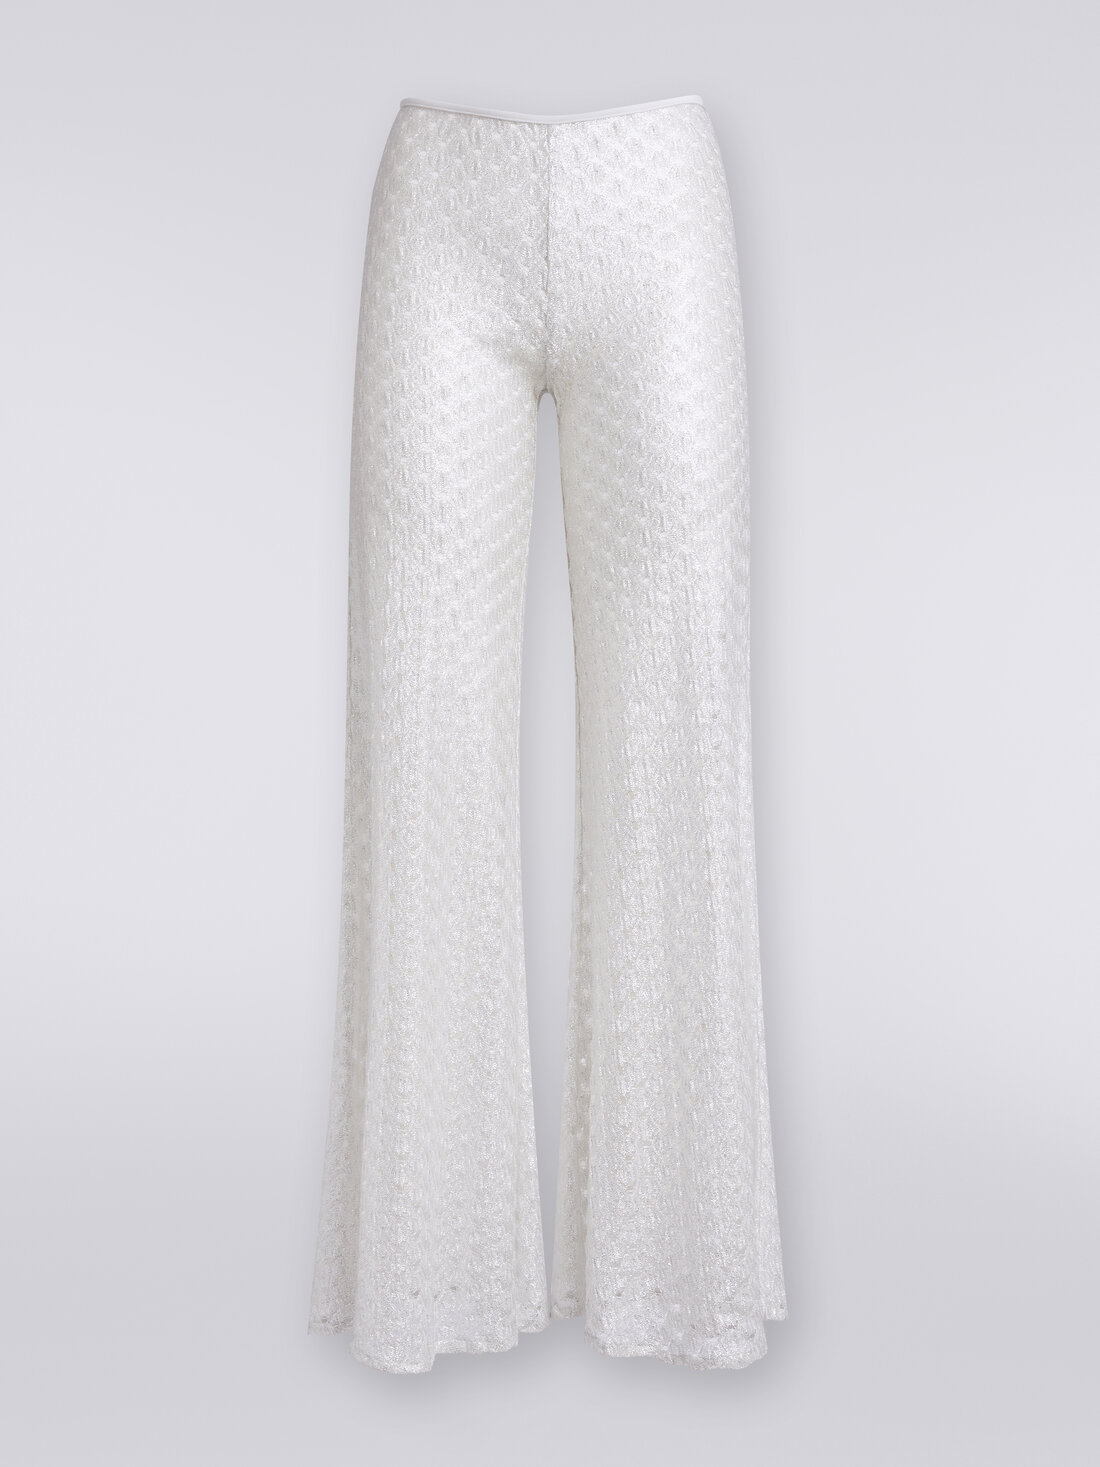 Lace-effect cover up trousers with flared hem, White  - MS24SI00BR00TC14001 - 0